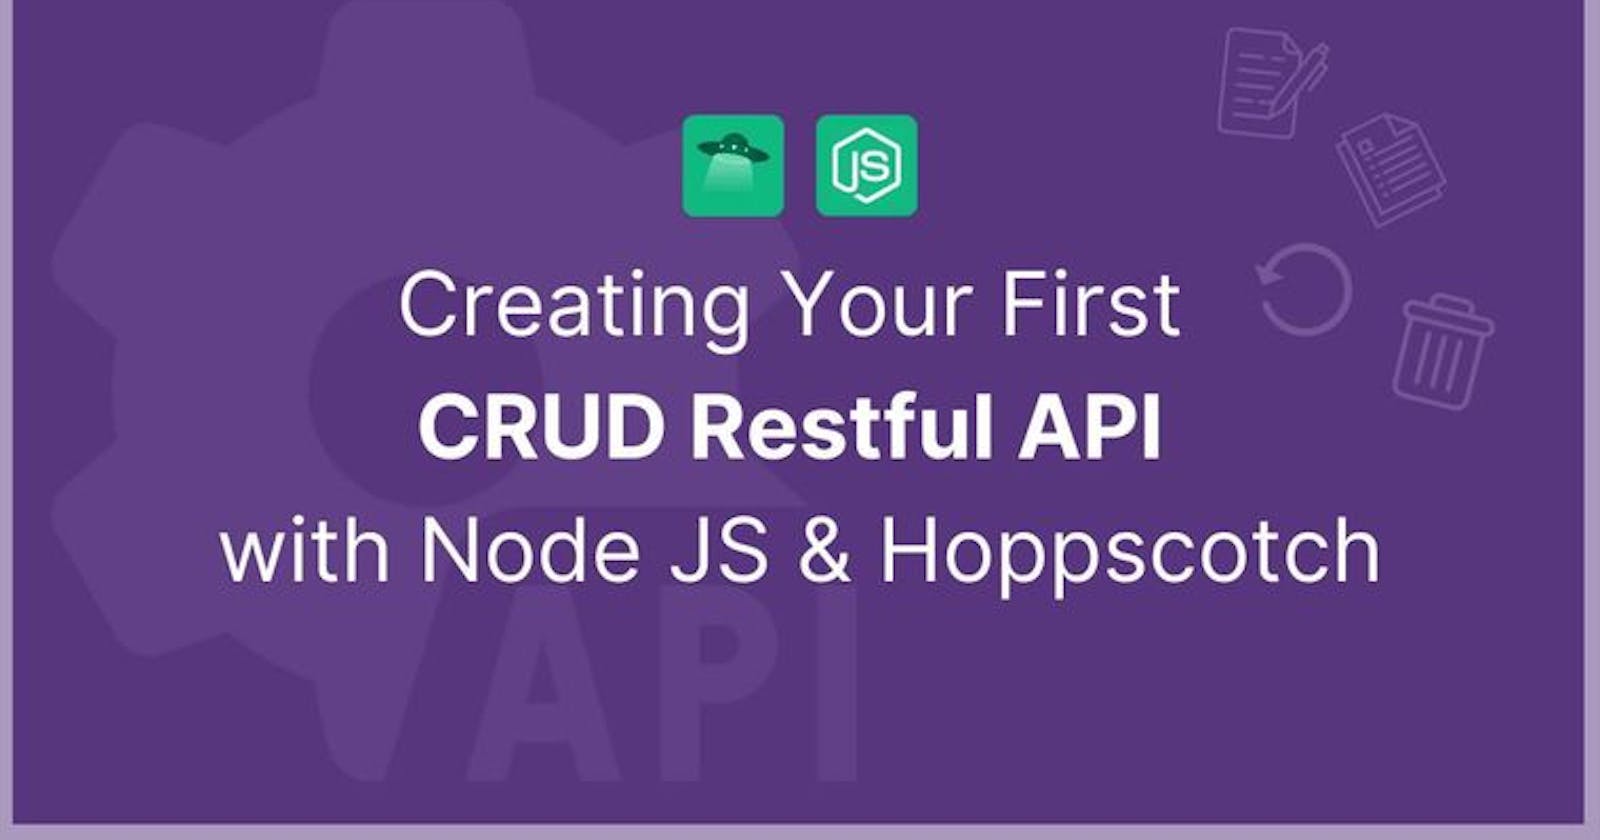 Creating your First CRUD Restful API with Node.JS and Hoppscotch